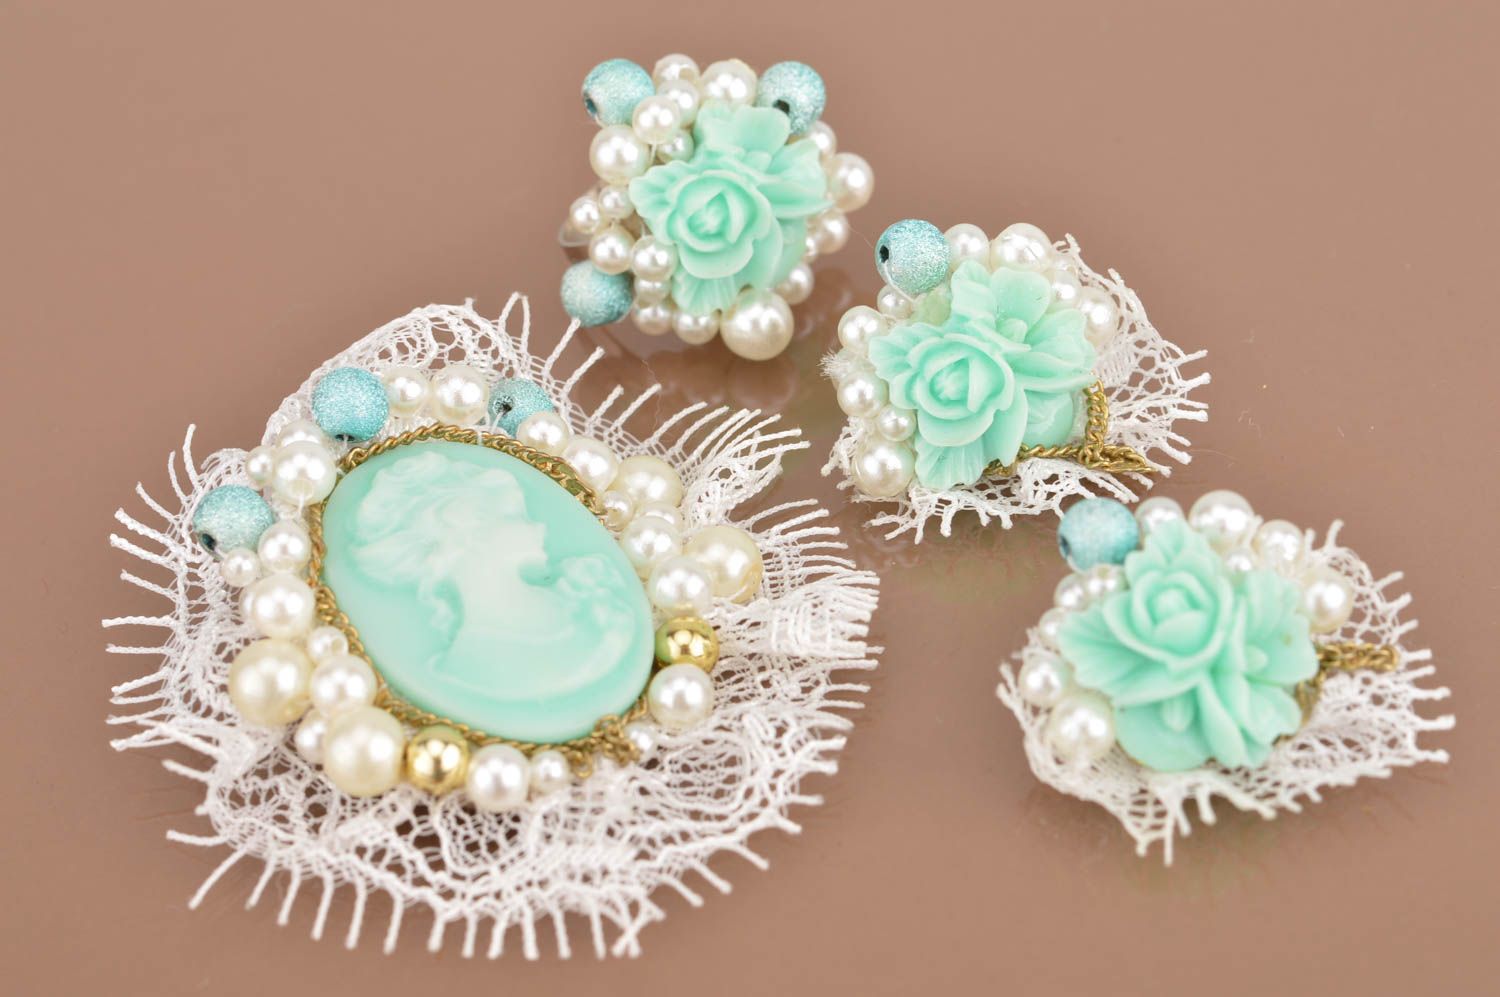 Handmade set of jewelry ring brooch and earrings made of lace and beads photo 2